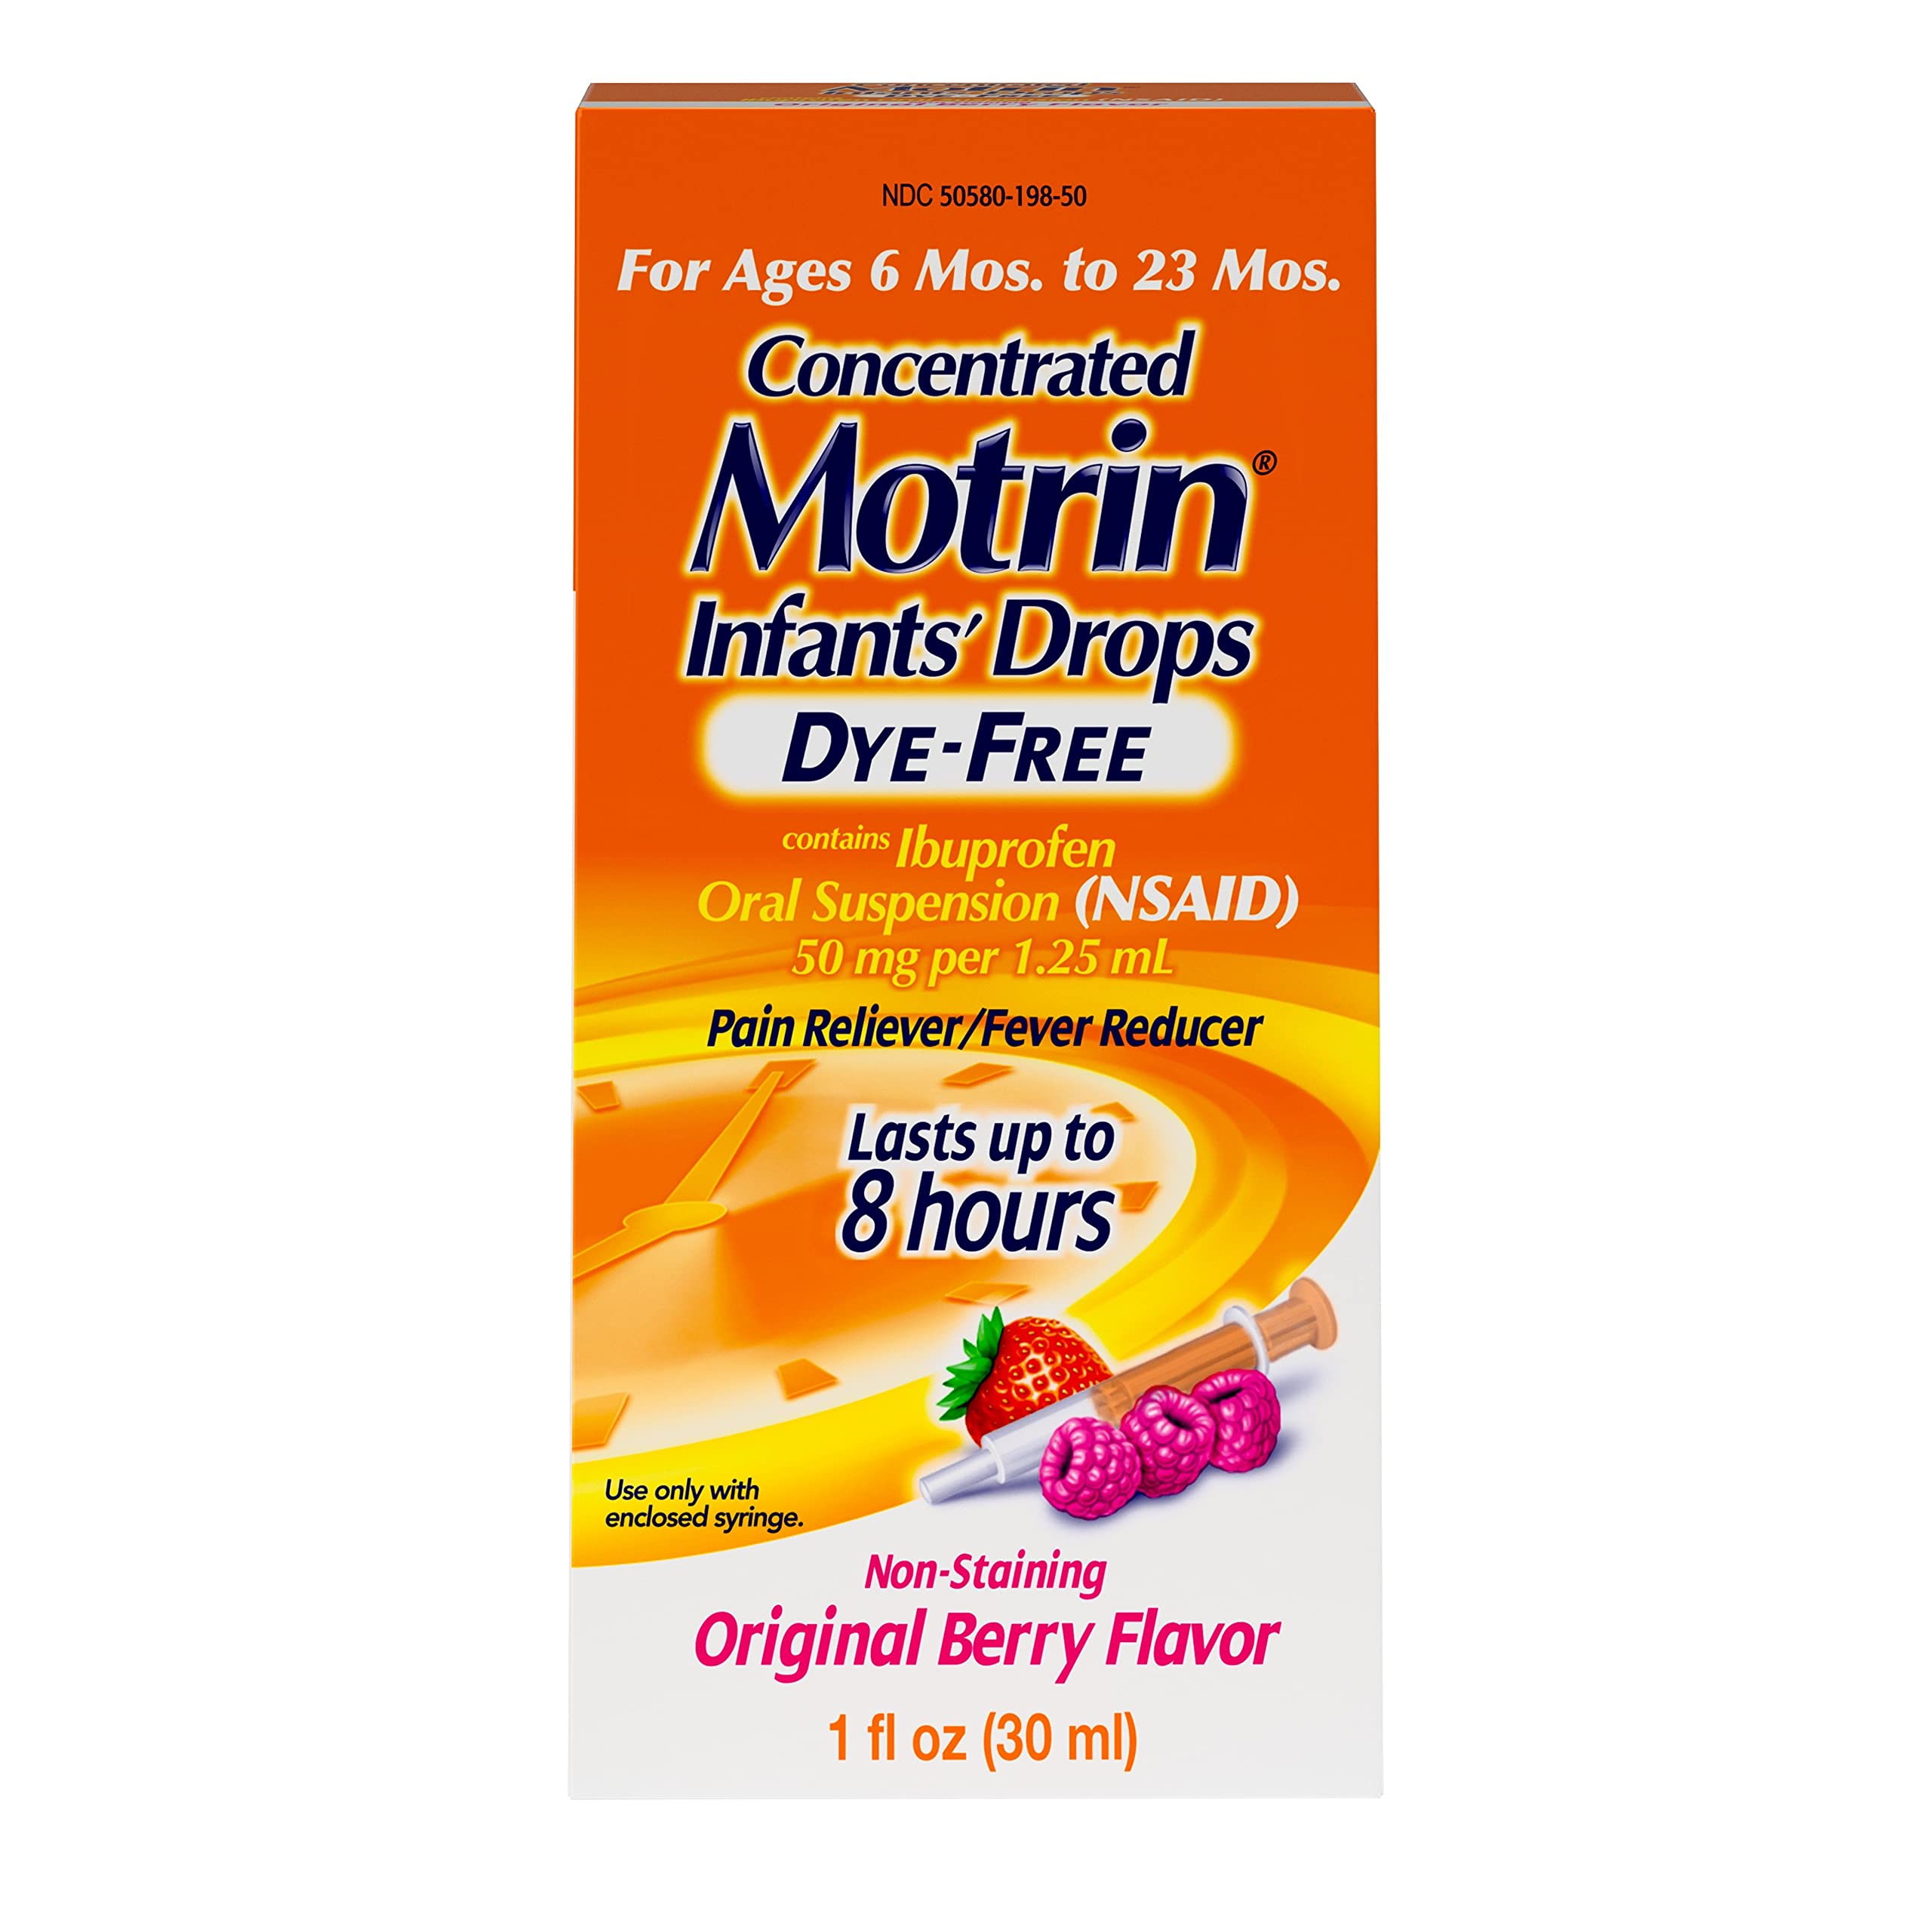 Motrin Infants' Oral Suspension Concentrated Liquid Medicine Drops with Ibuprofen, NSAID Fever Reducer & Pain Reliever for Babies, Dye Free, Alcohol-Free, Original Berry Flavor, 1 fl. oz